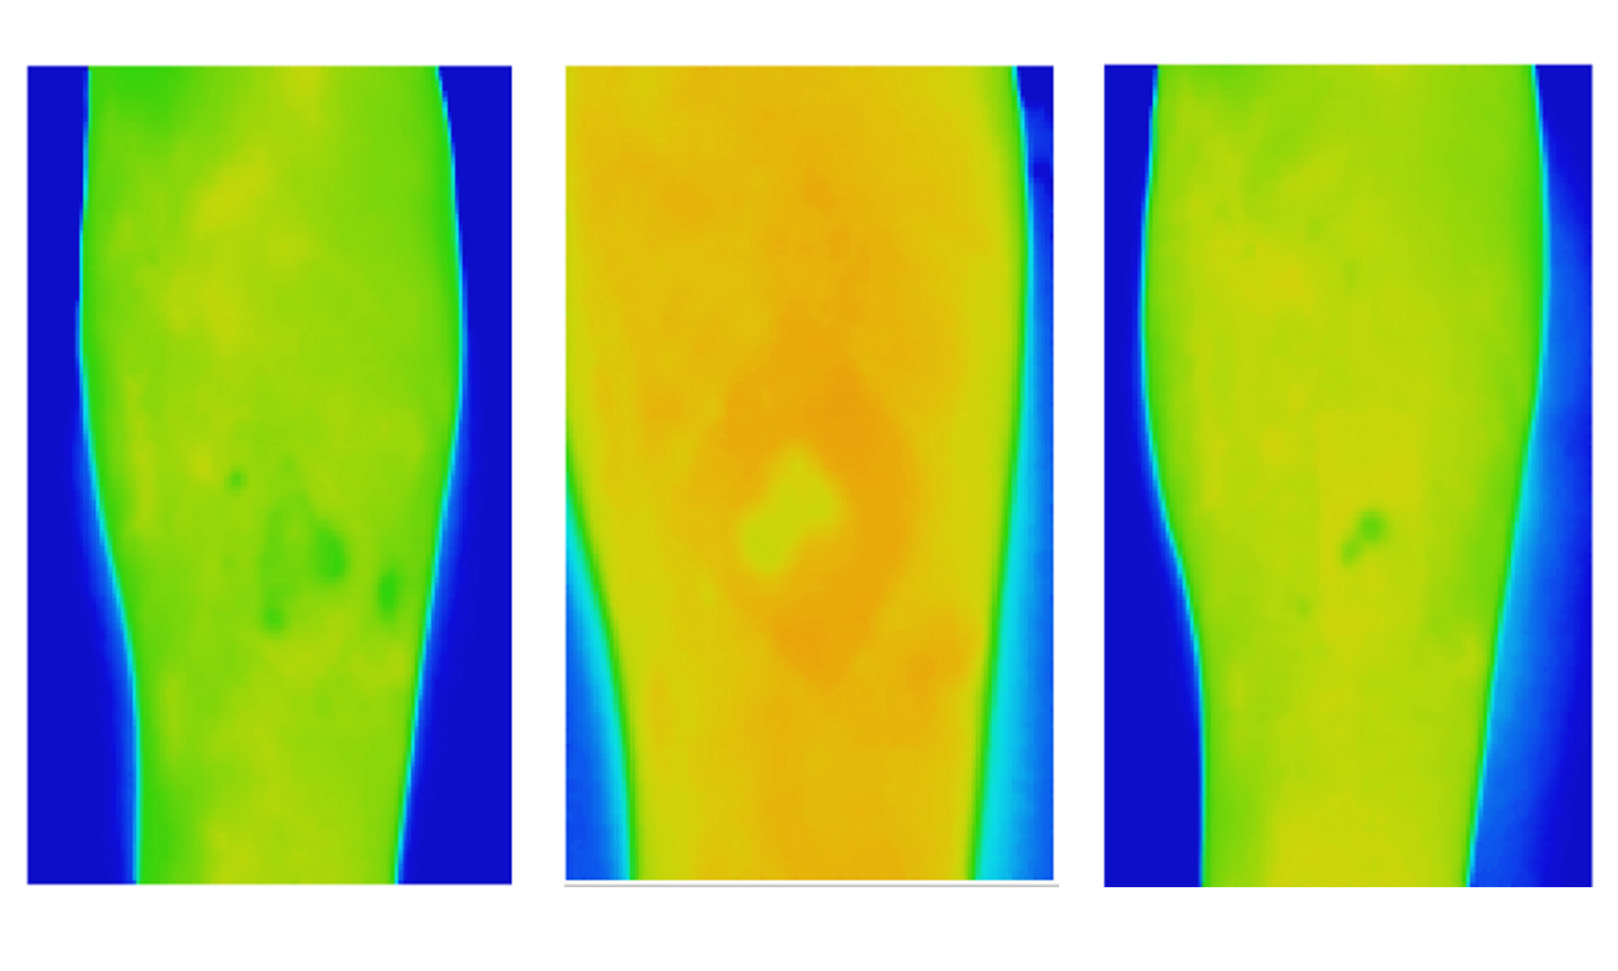 Thermal images of a venous leg ulcer showing healthy healing progress over three weeks. Credit: RMIT University